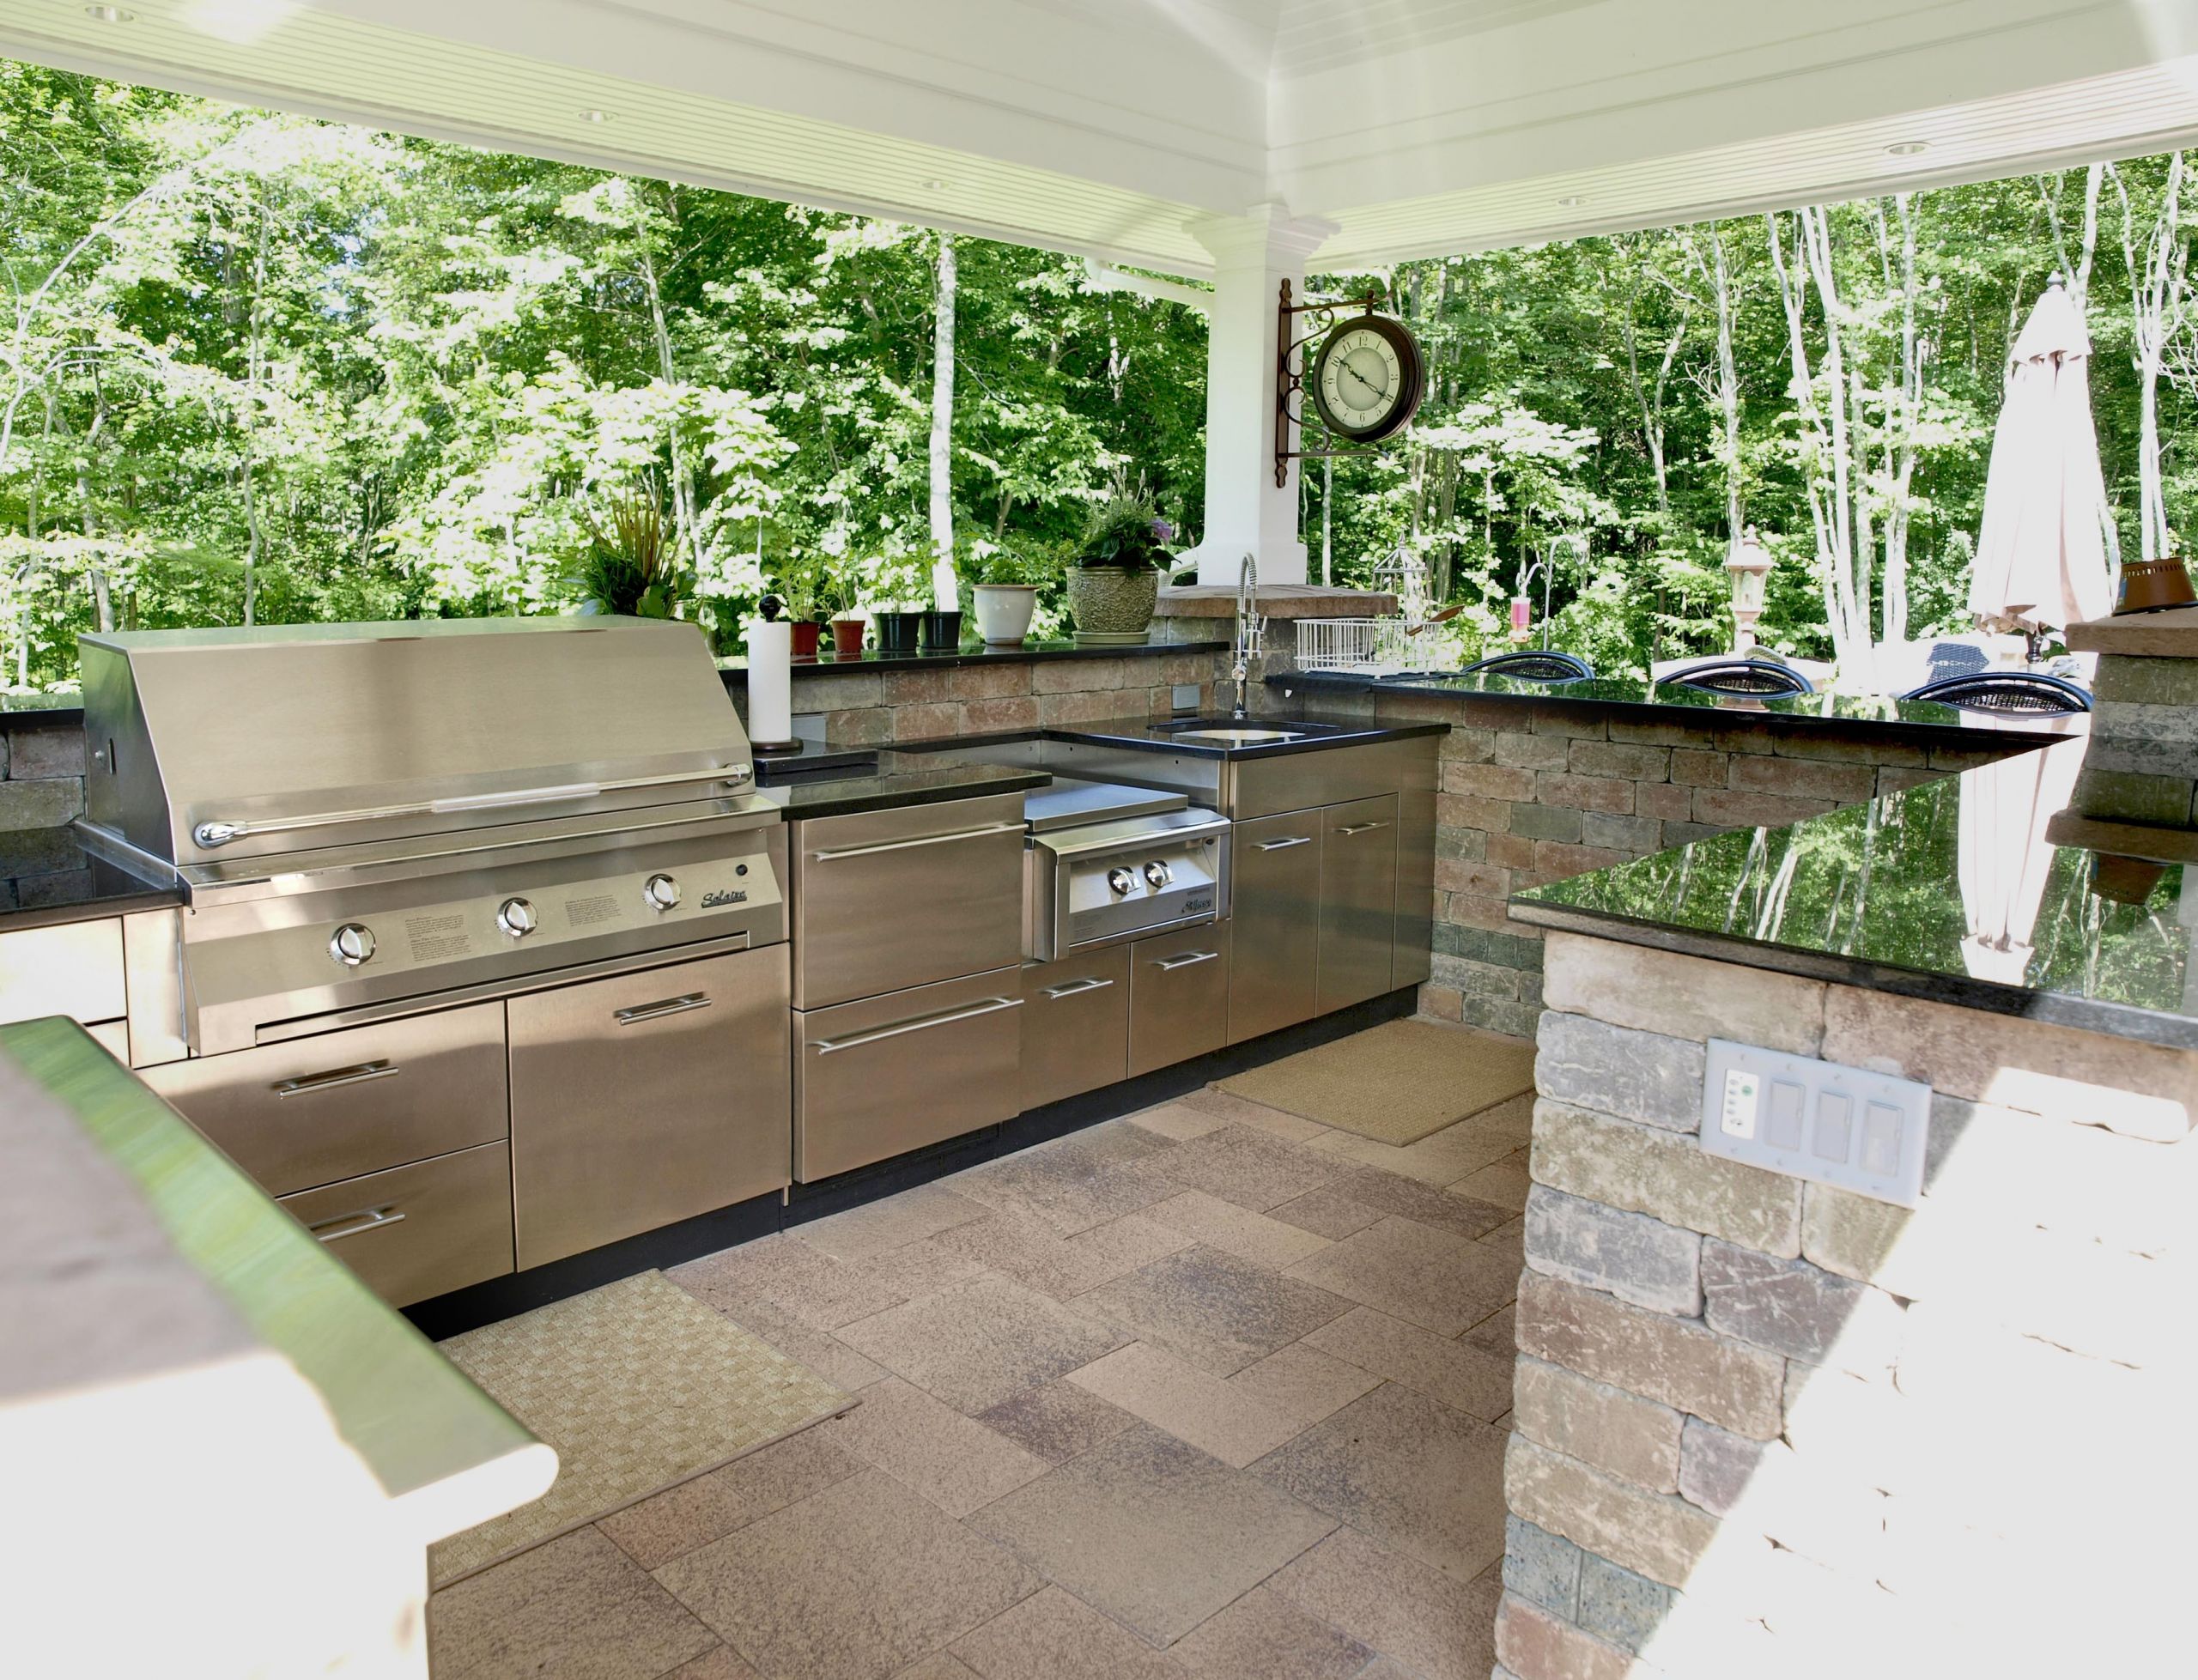 Plans For Outdoor Kitchen
 Outdoor Kitchens = The Ultimate Garden Party